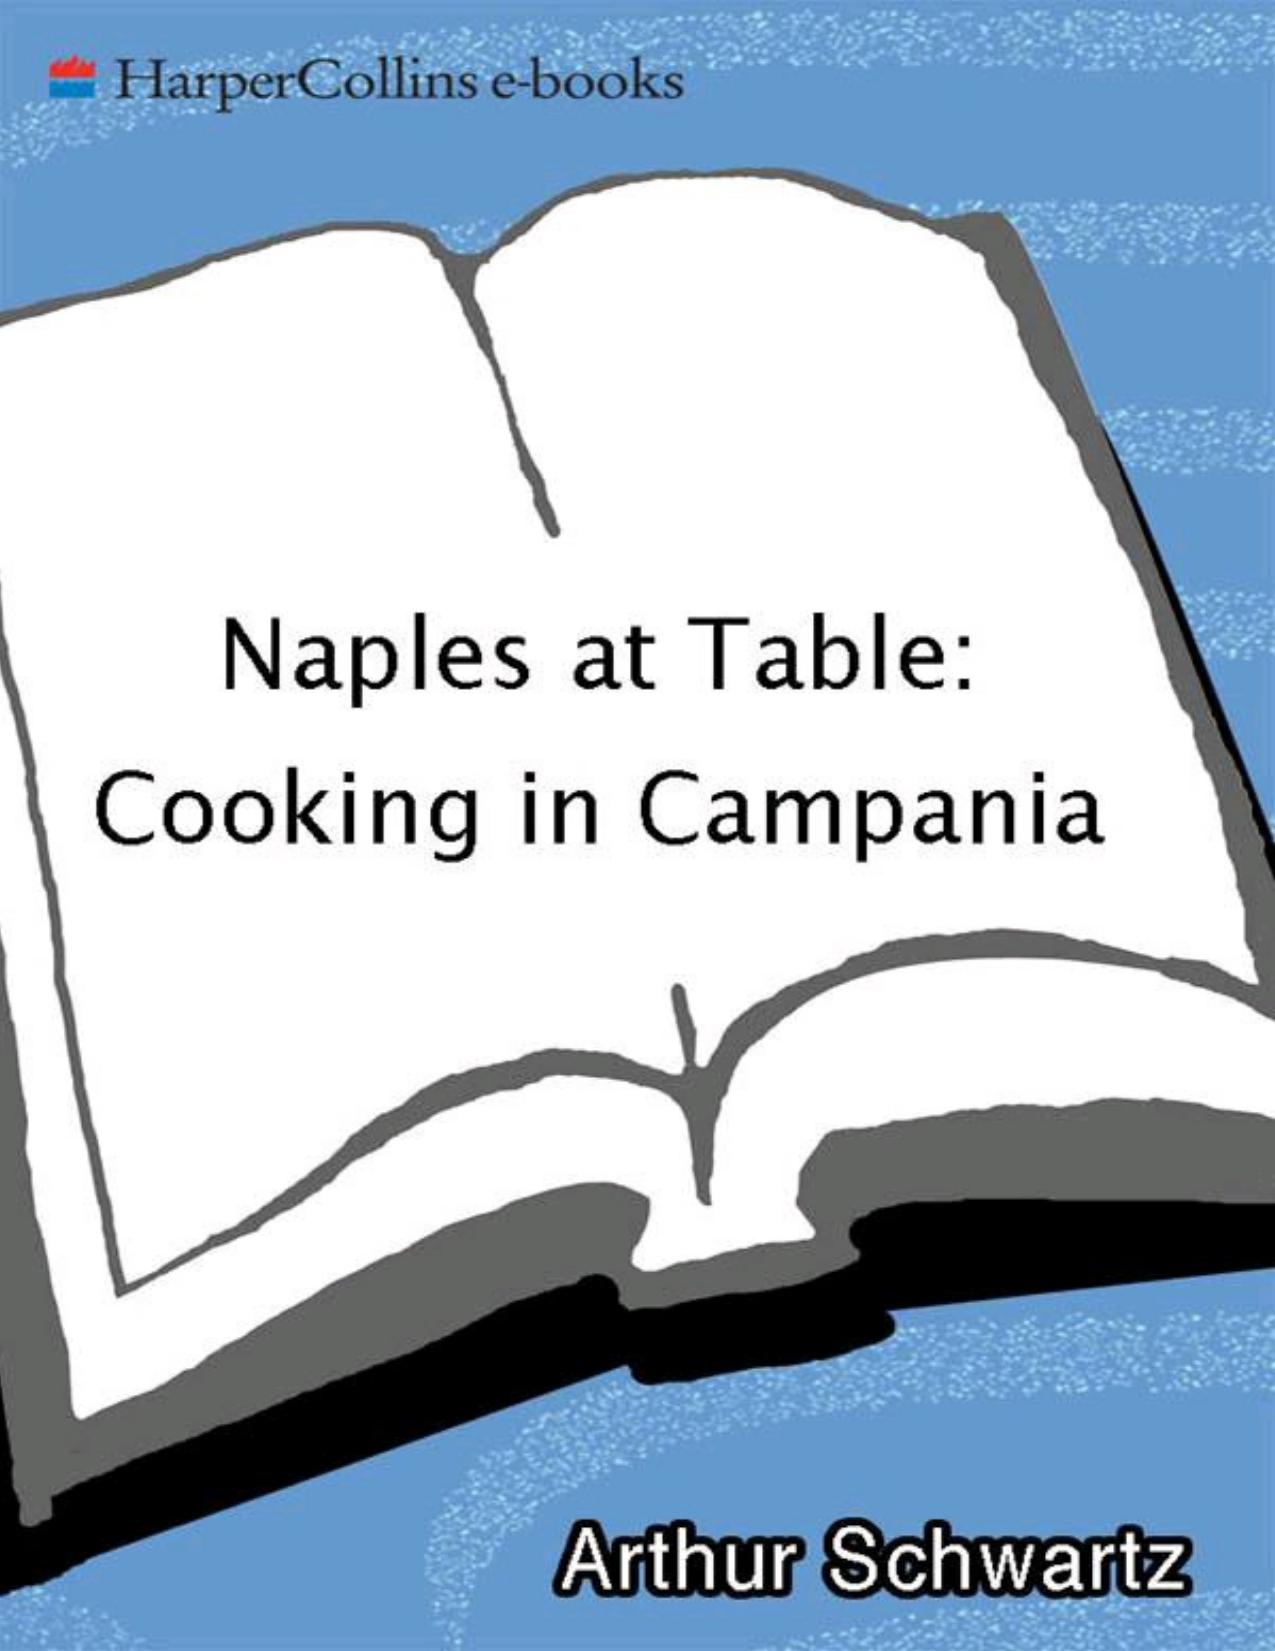 Naples at Table by Arthur Schwartz